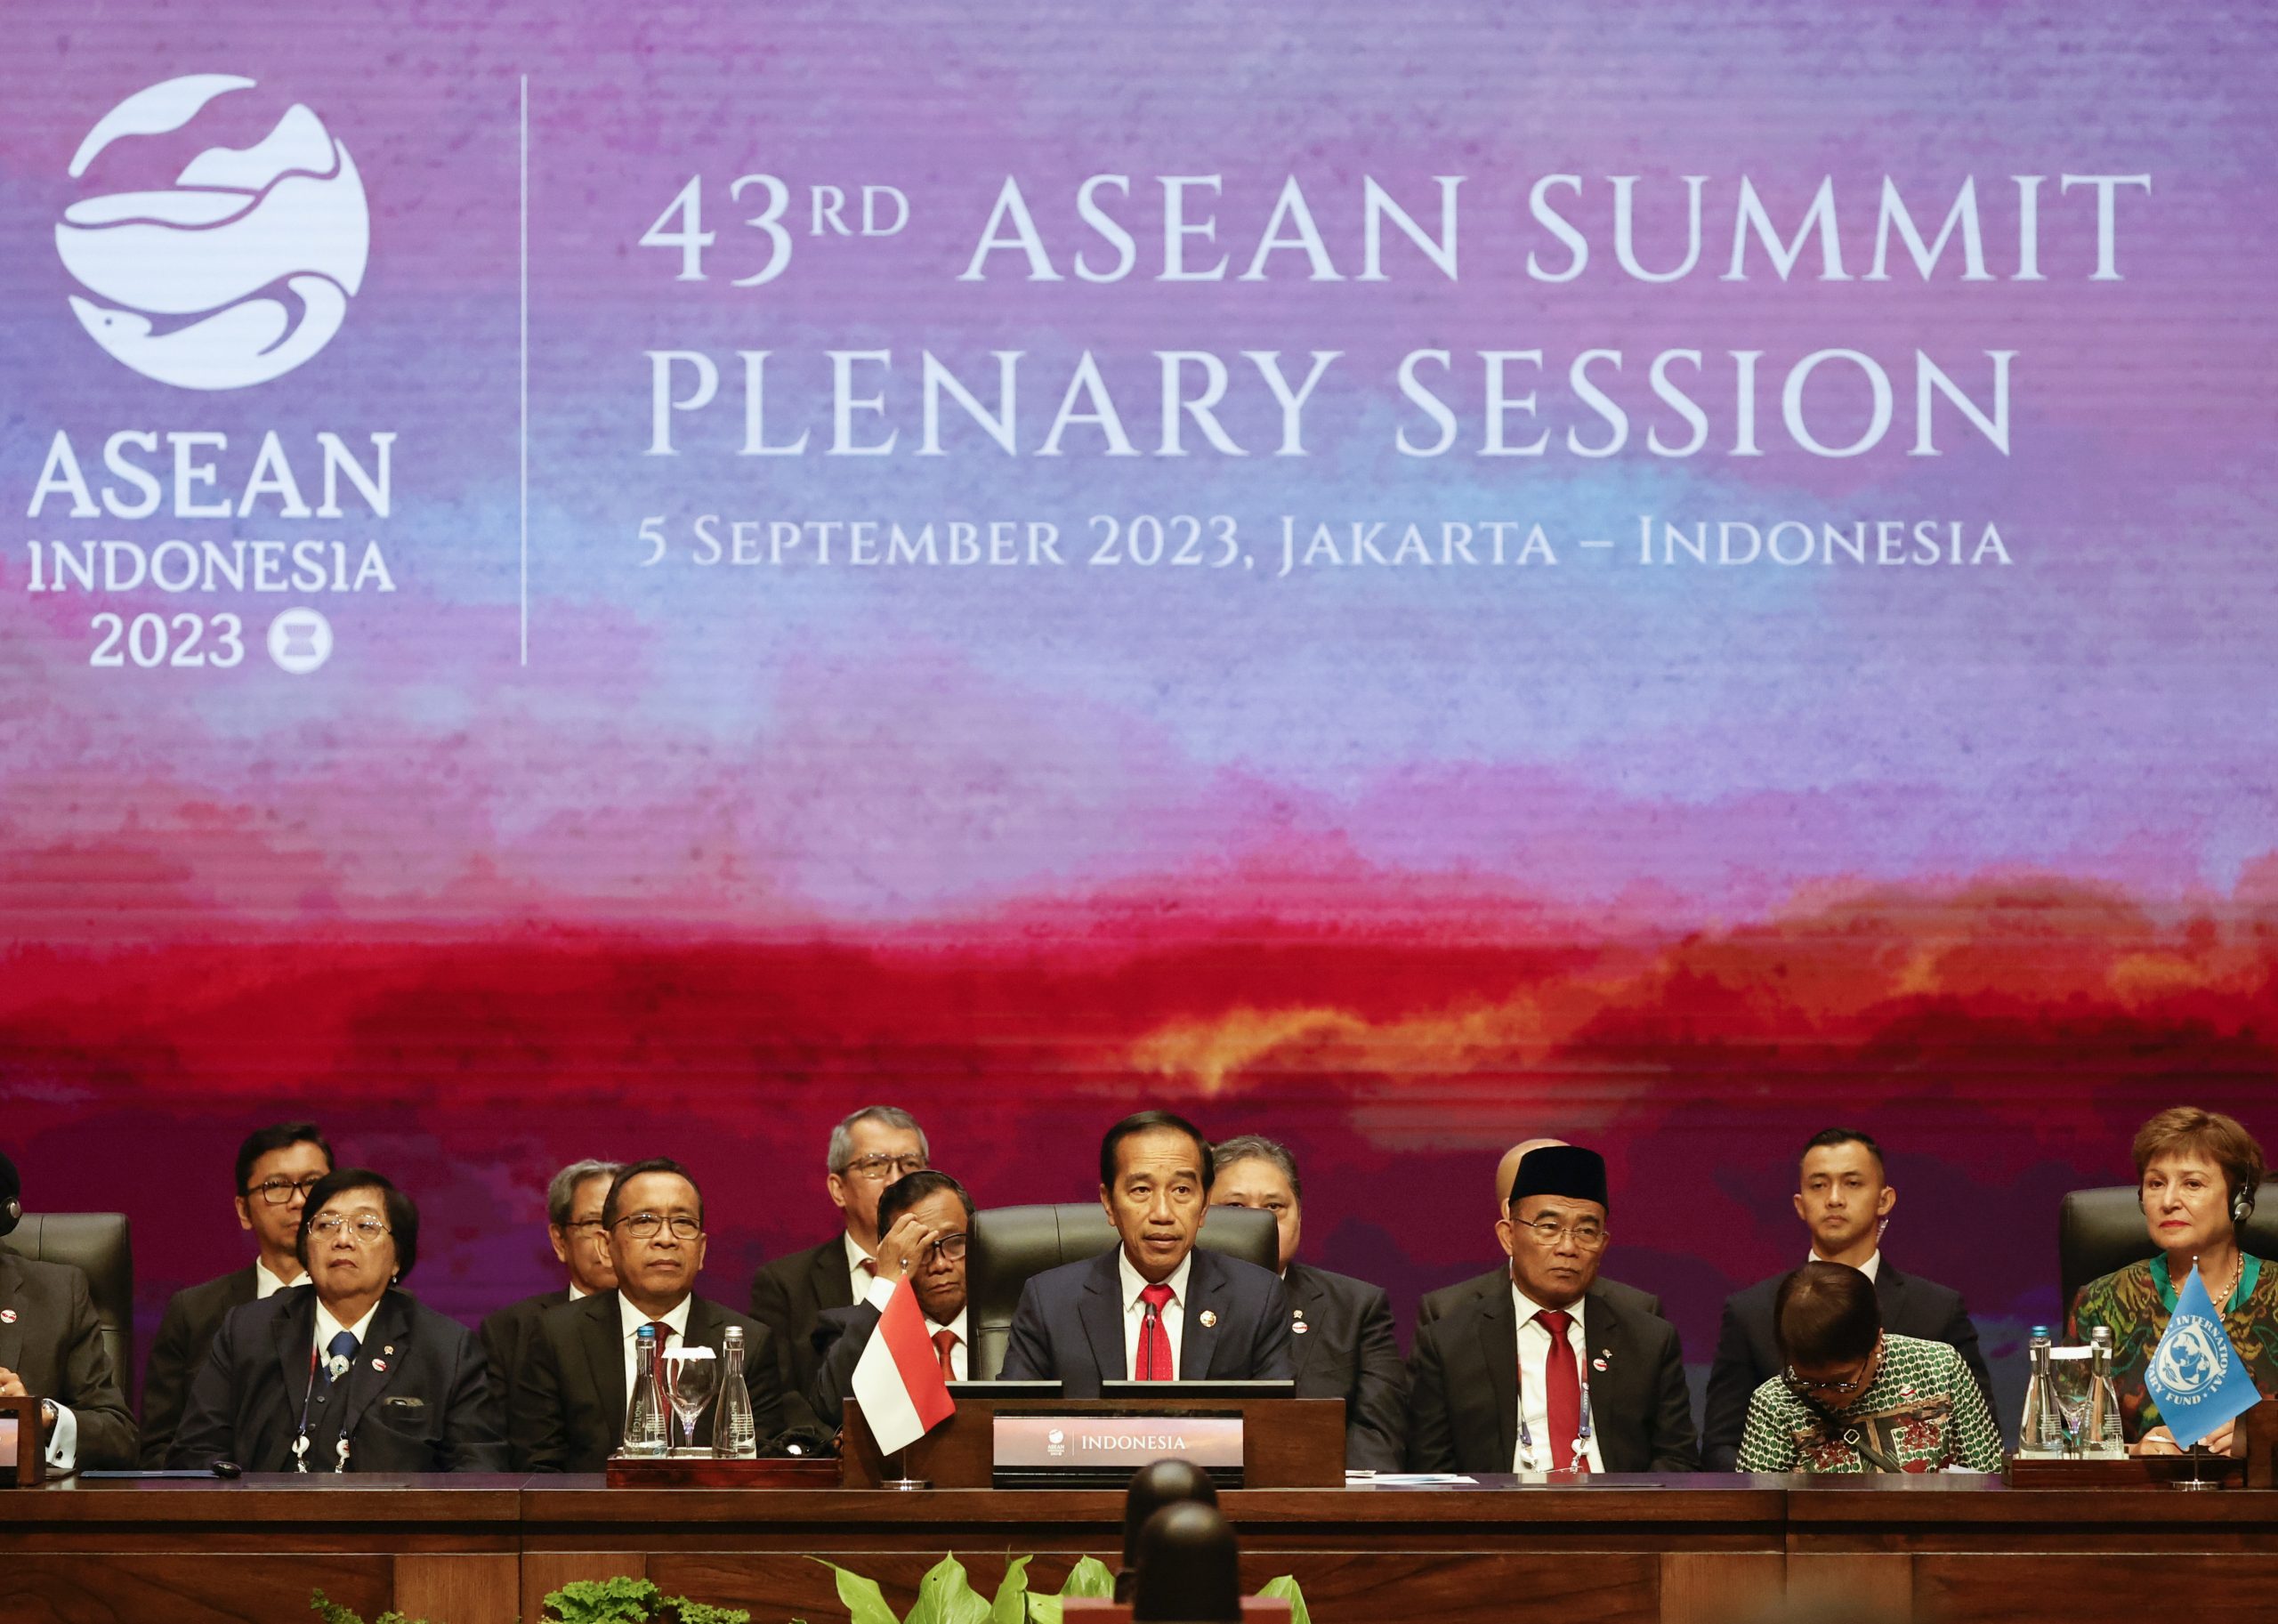 epa10841054 Indonesian President Joko Widodo (C) delivers remarks during a plenary session of the 43rd Association of Southeast Asian Nations (ASEAN) Summit in Jakarta, Indonesia, 05 September 2023. Indonesia will host the 43rd ASEAN Summit and related summits on 05 to 07 September 2023.  EPA/WILLY KURNIAWAN / POOL